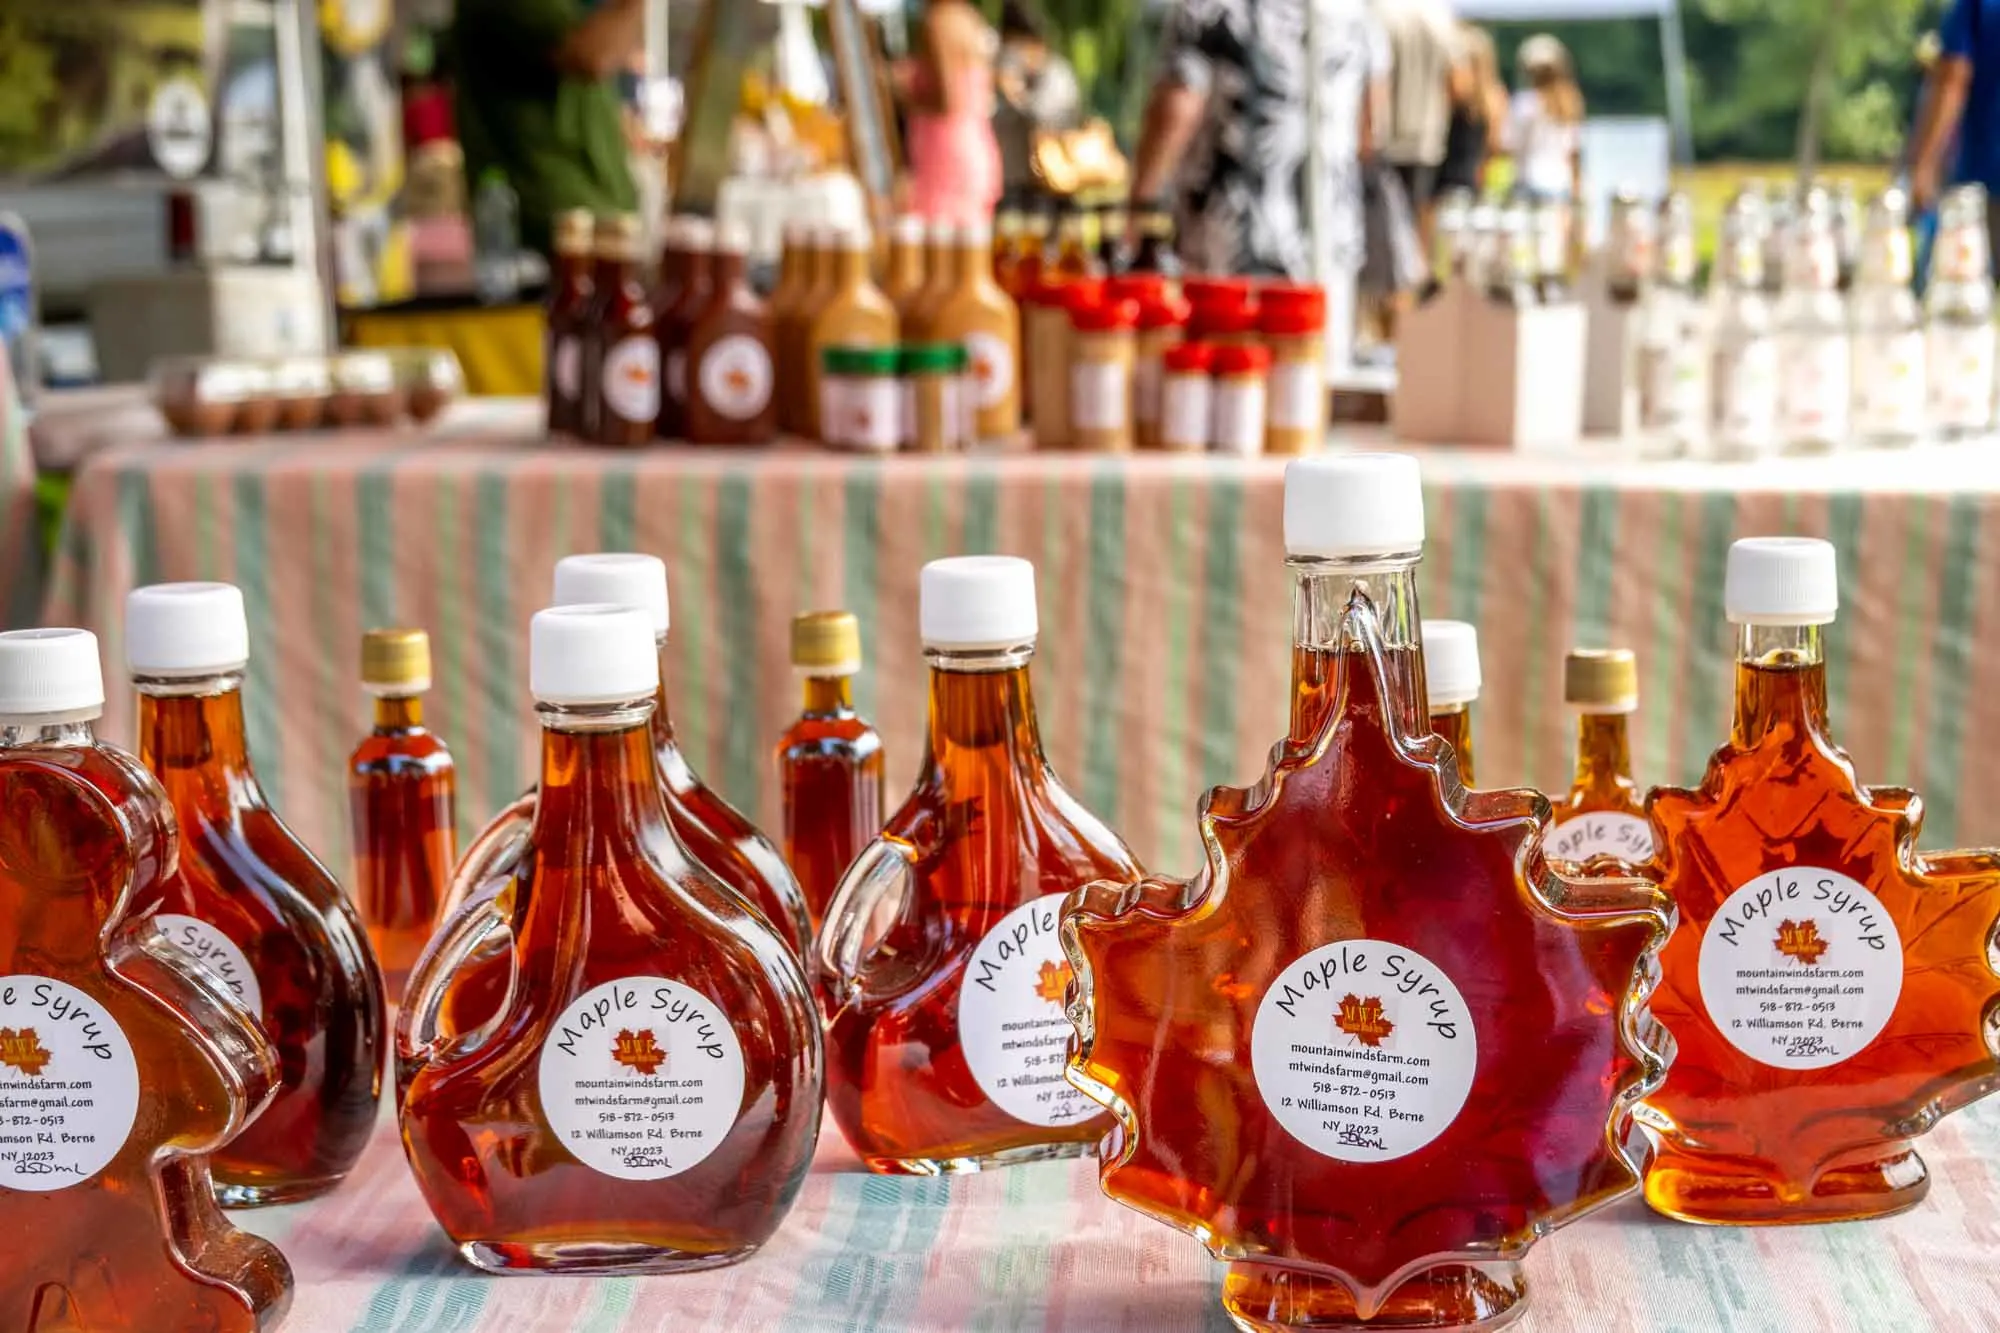 Bottles of maple syrup on a table